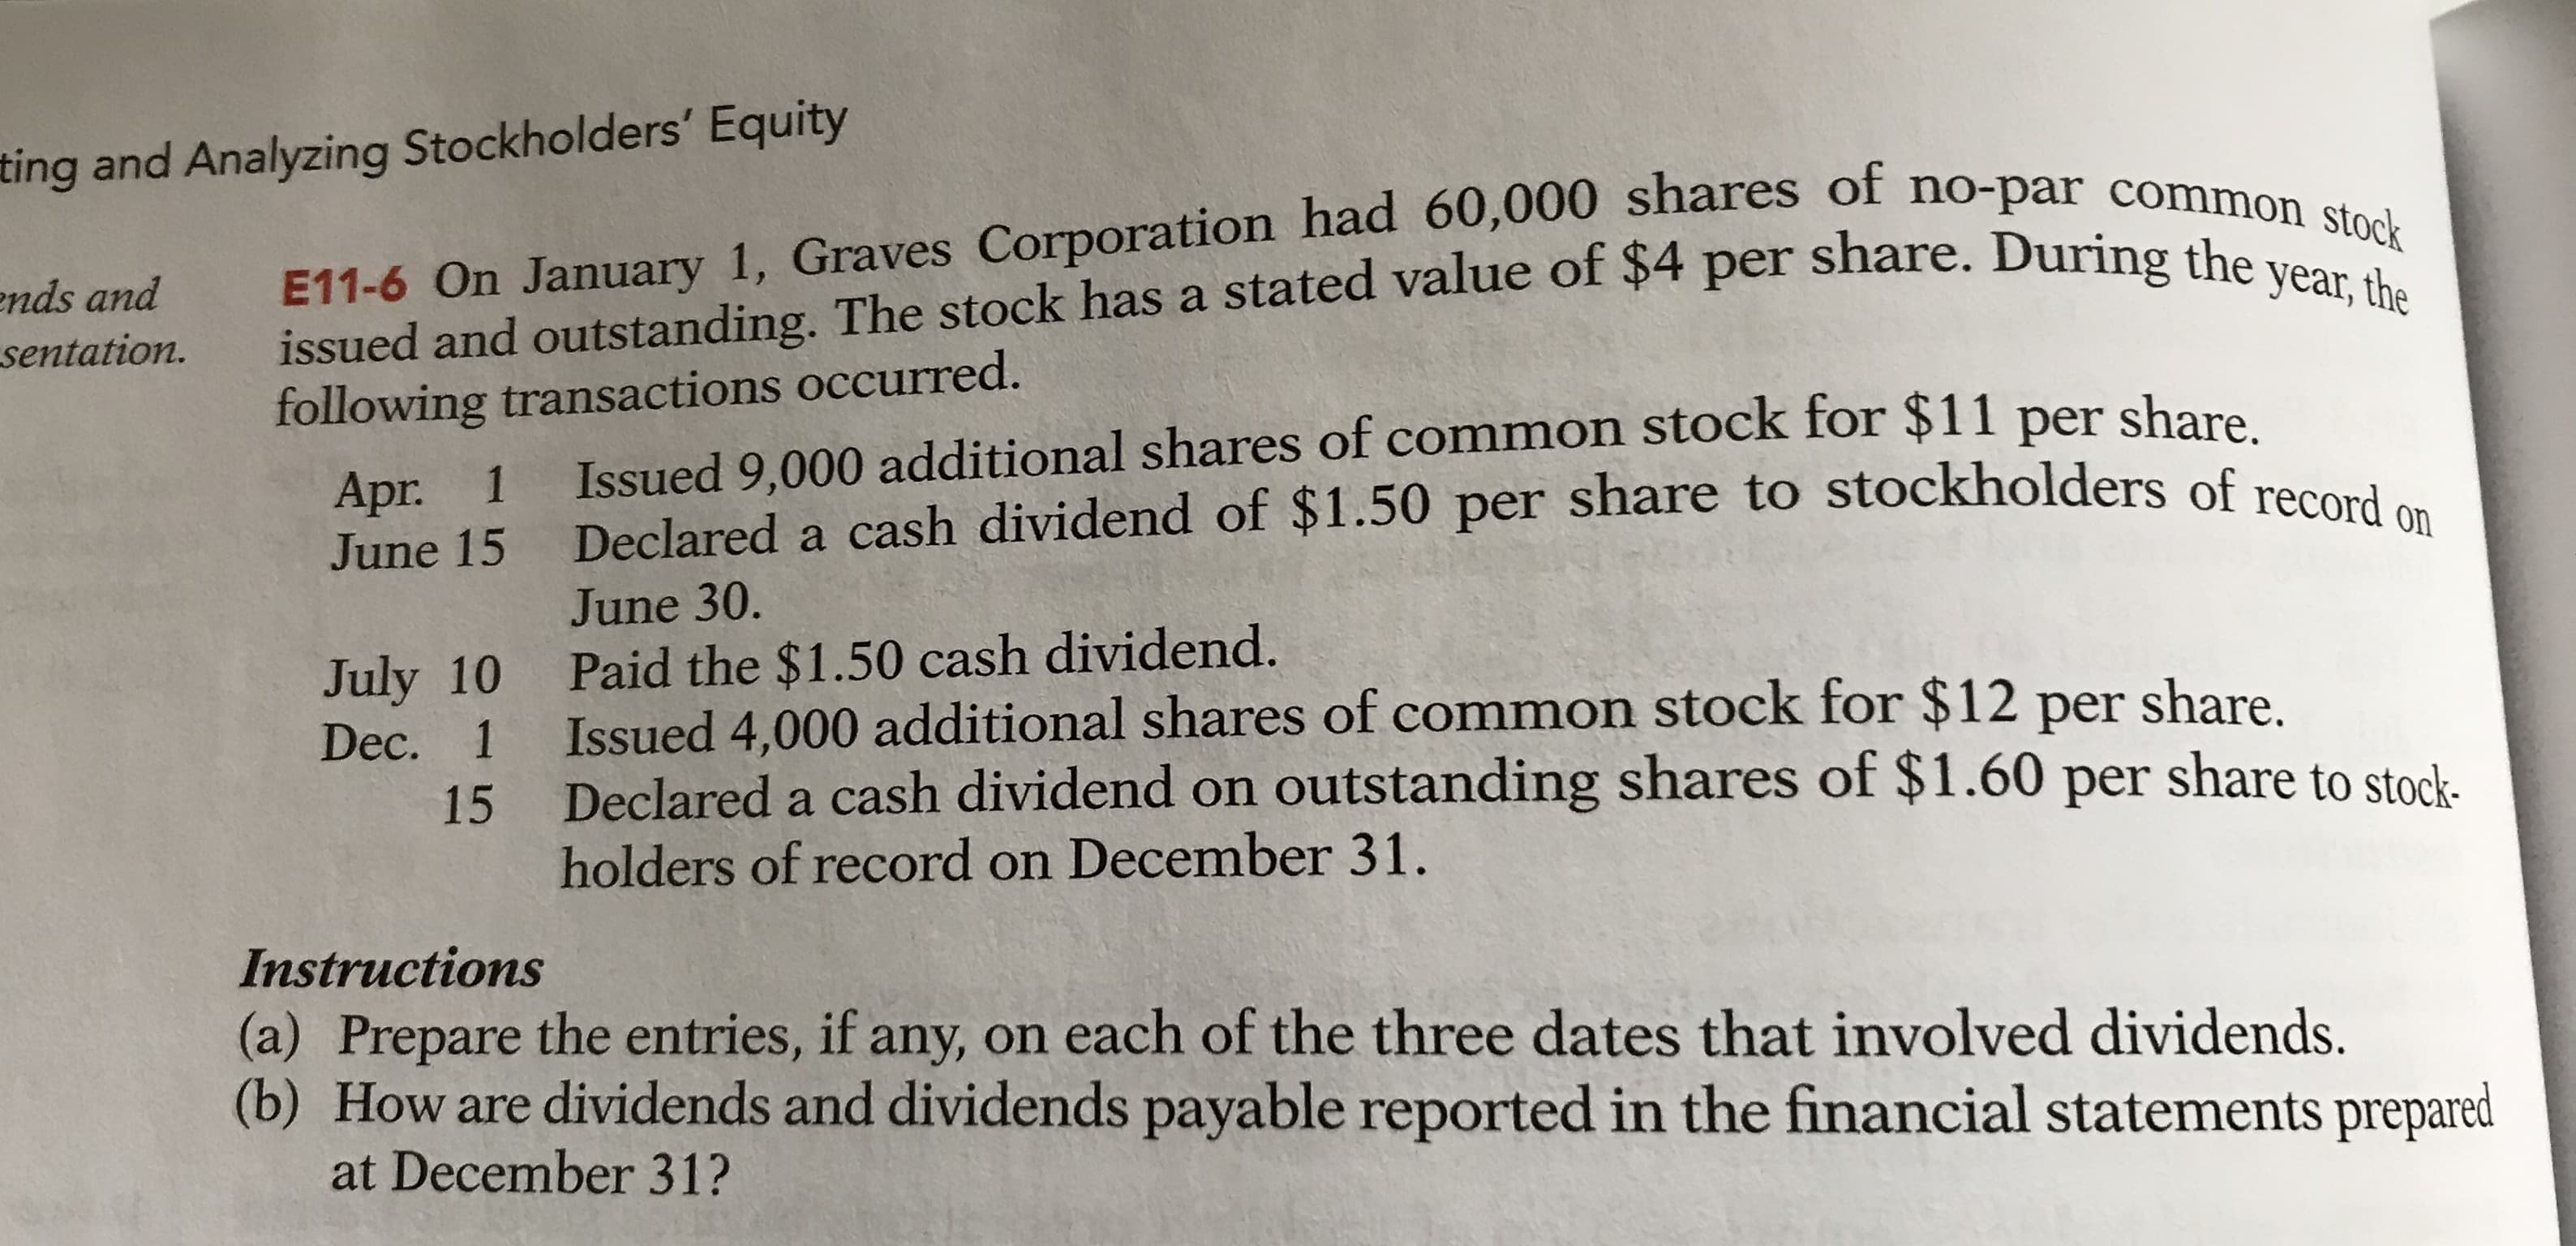 ting and Analyzing Stockholders' Equity
ends and
sentation.
E11-6 On January 1, Graves Corporation had 60,000 shares of no-par common stock
issued and outstanding. The stock has a stated value of $4 per share. During the year, the
following transactions occurred.
Apr. 1
June 15
Issued 9,000 additional shares of common stock for $11 per share
Declared a cash dividend of $1.50 per share to stockholders of record on
June 30.
Paid the $1.50 cash dividend.
Issued 4,000 additional shares of common stock for $12 per share.
Declared a cash dividend on outstanding shares of $1.60 per share to stock.
holders of record on December 31.
July 10
Dec.
1
15
Instructions
(a) Prepare the entries, if any, on each of the three dates that involved dividends.
(b) How are dividends and dividends payable reported in the financial statements prepared
at December 31?
